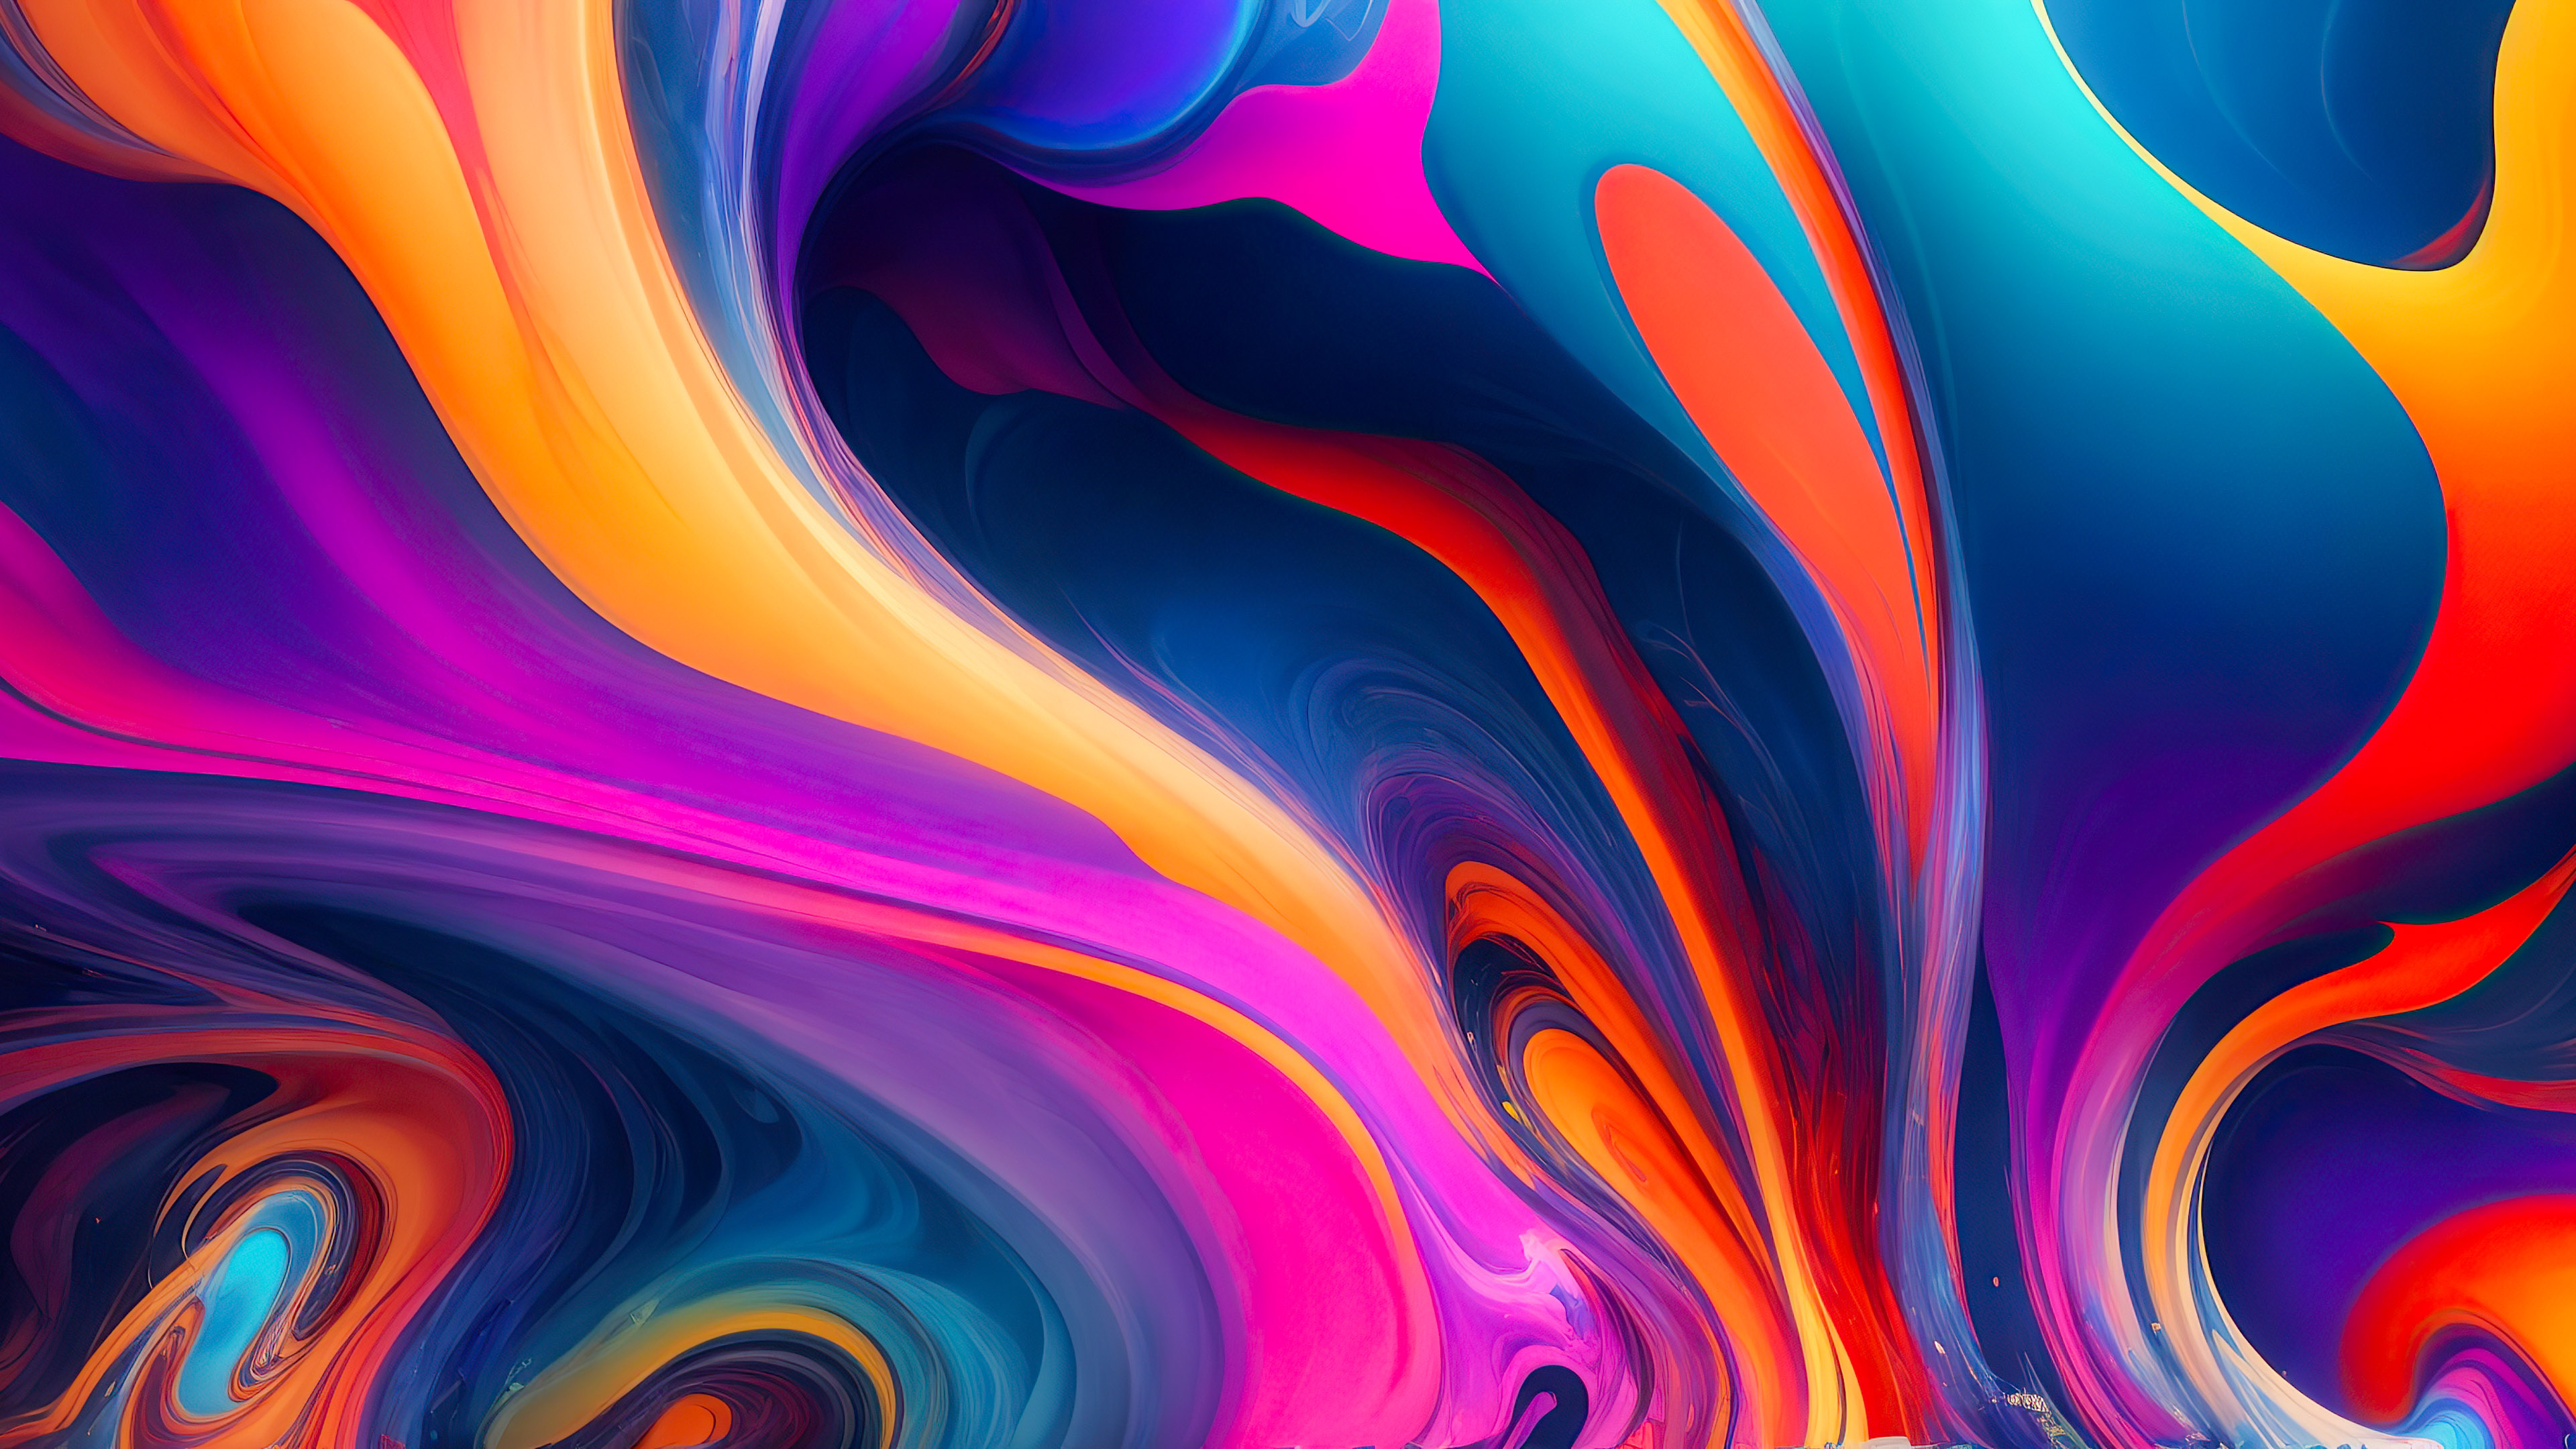 Immerse yourself in a colorful abstract art wallpaper, featuring complex work and a sense of chaos and spiritualism that sparks creativity.